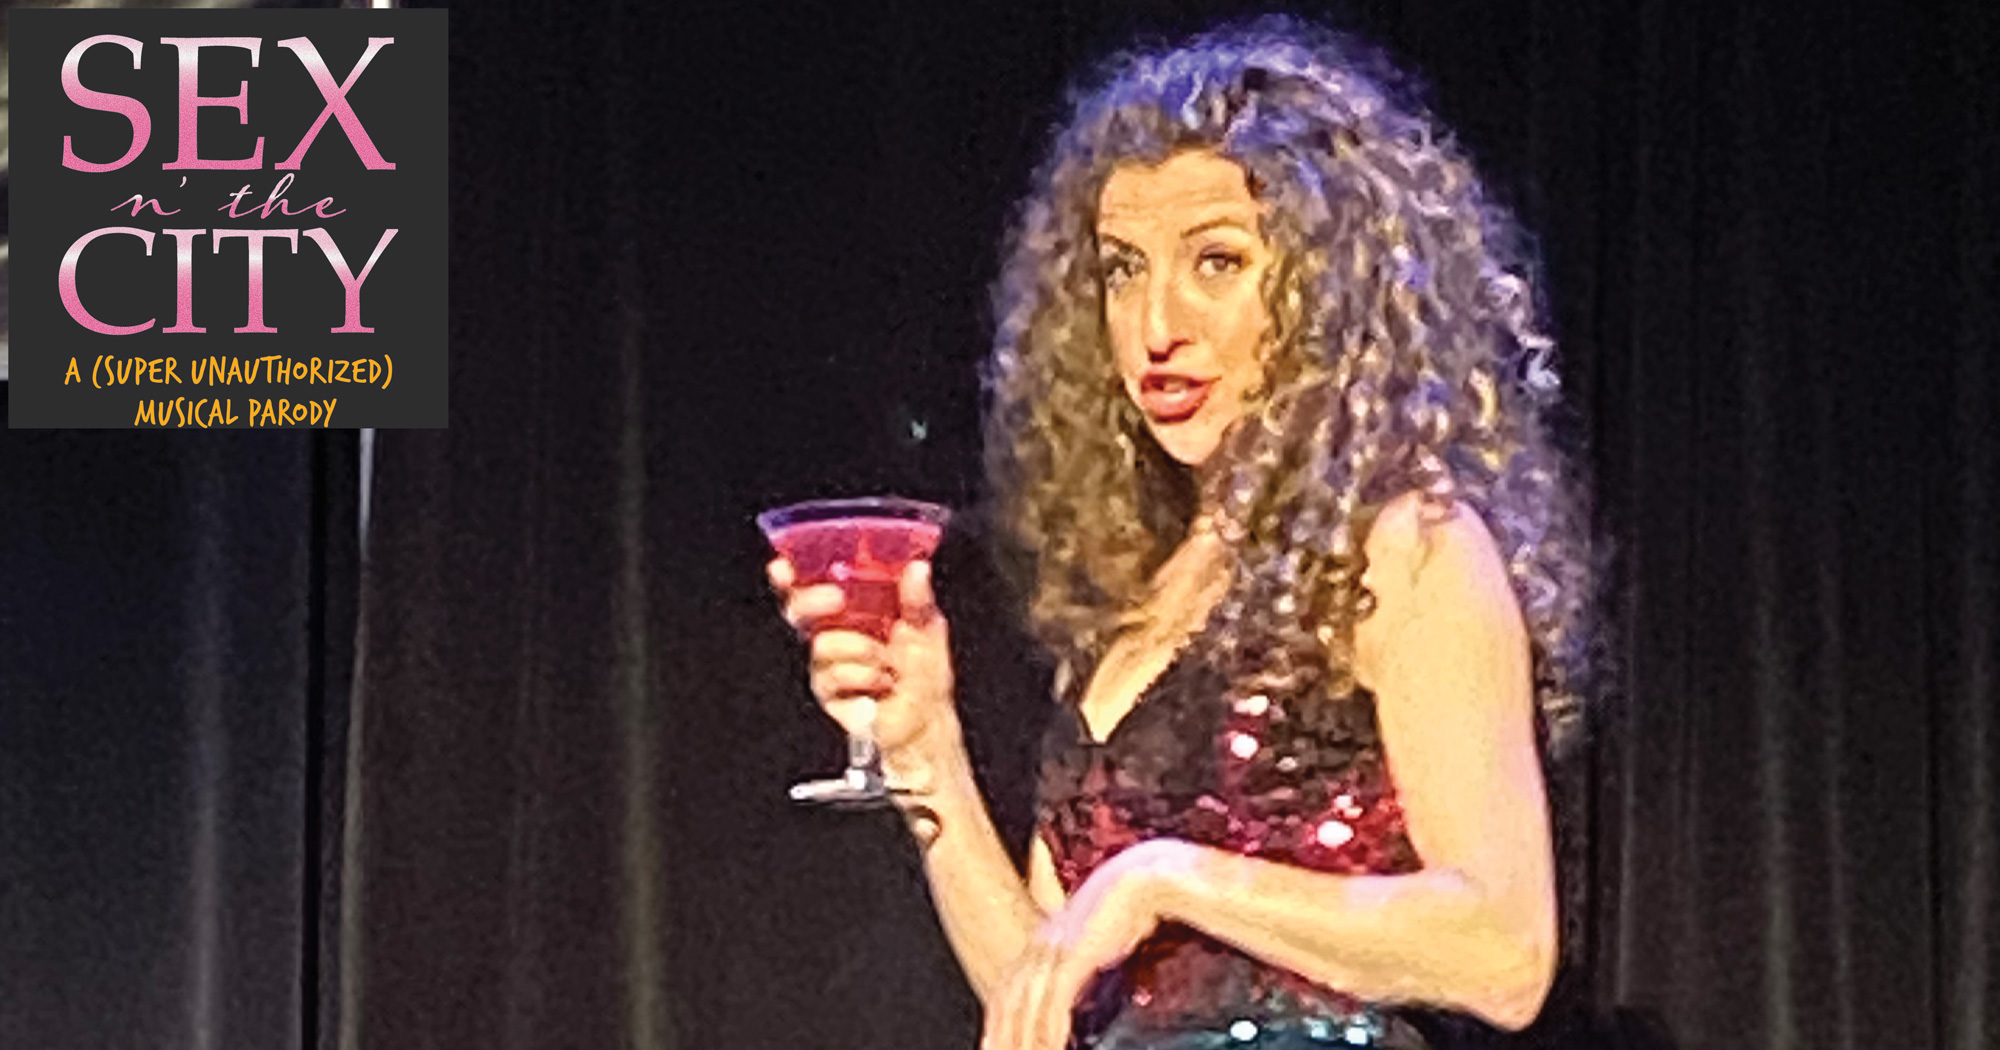 A woman speaking while holding a martini glass.